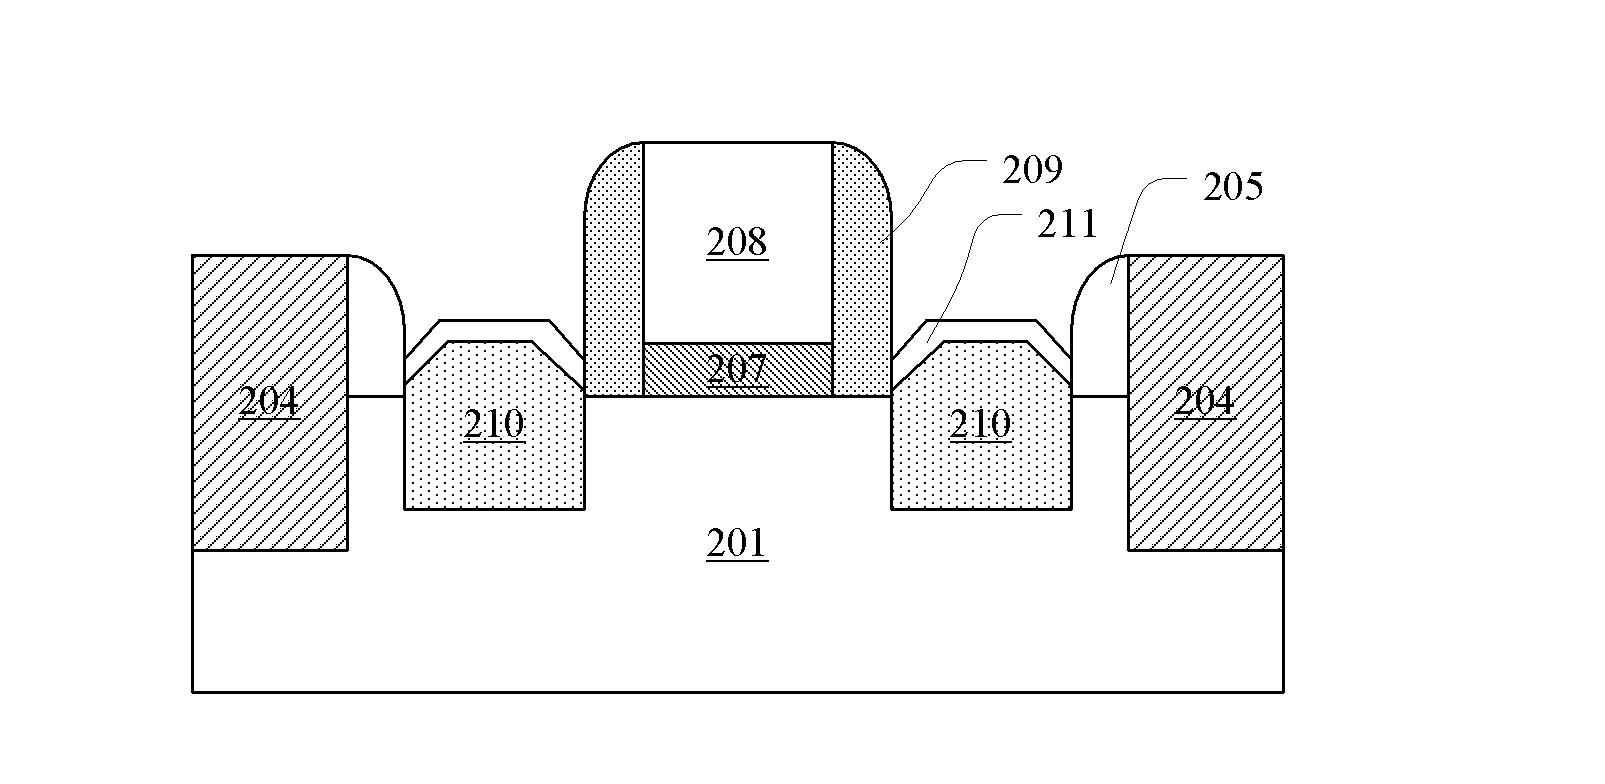 Method of manufacturing mosfet